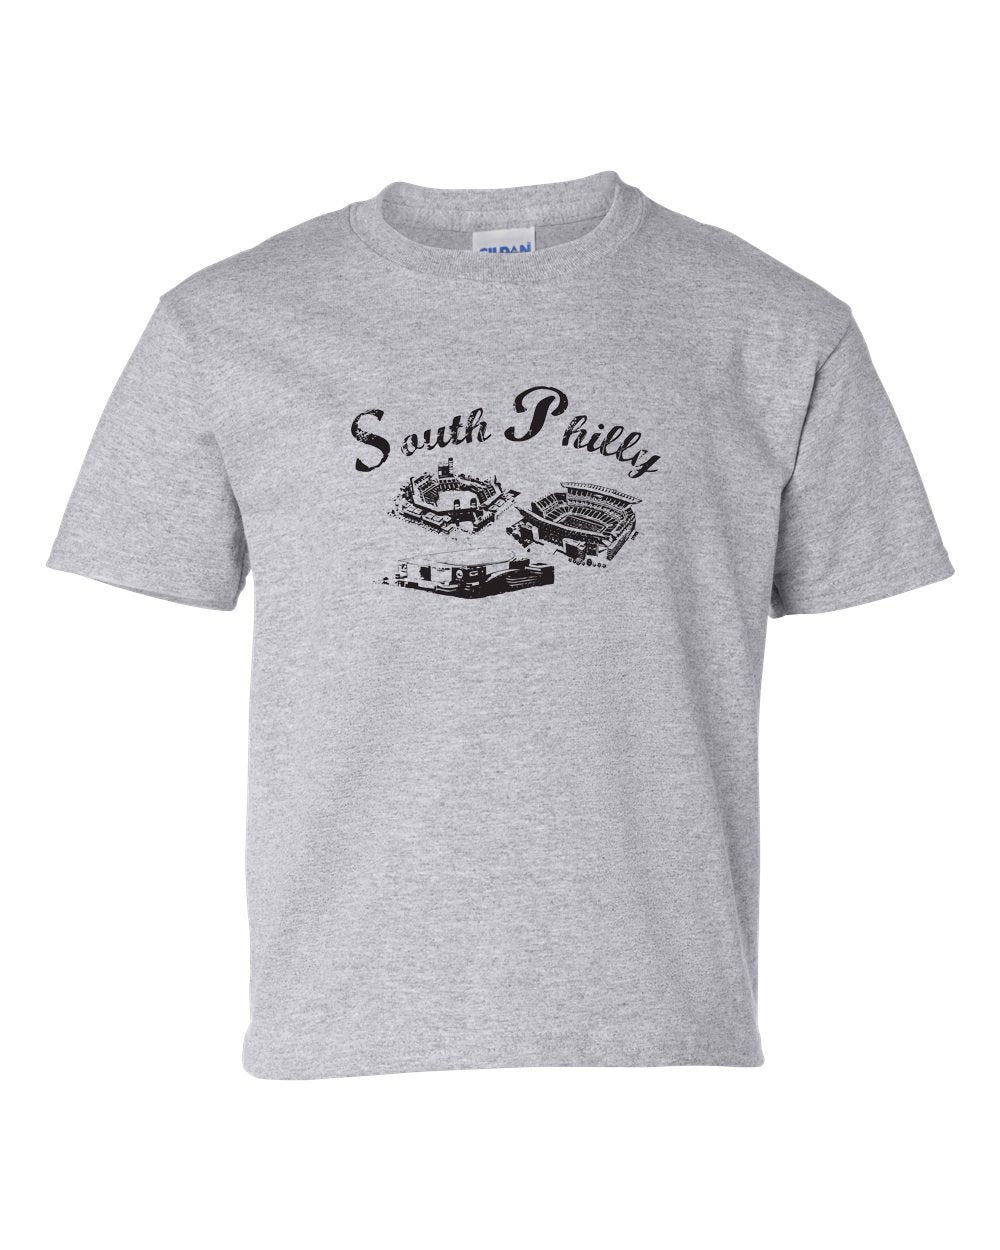 South Philly KIDS T-Shirt